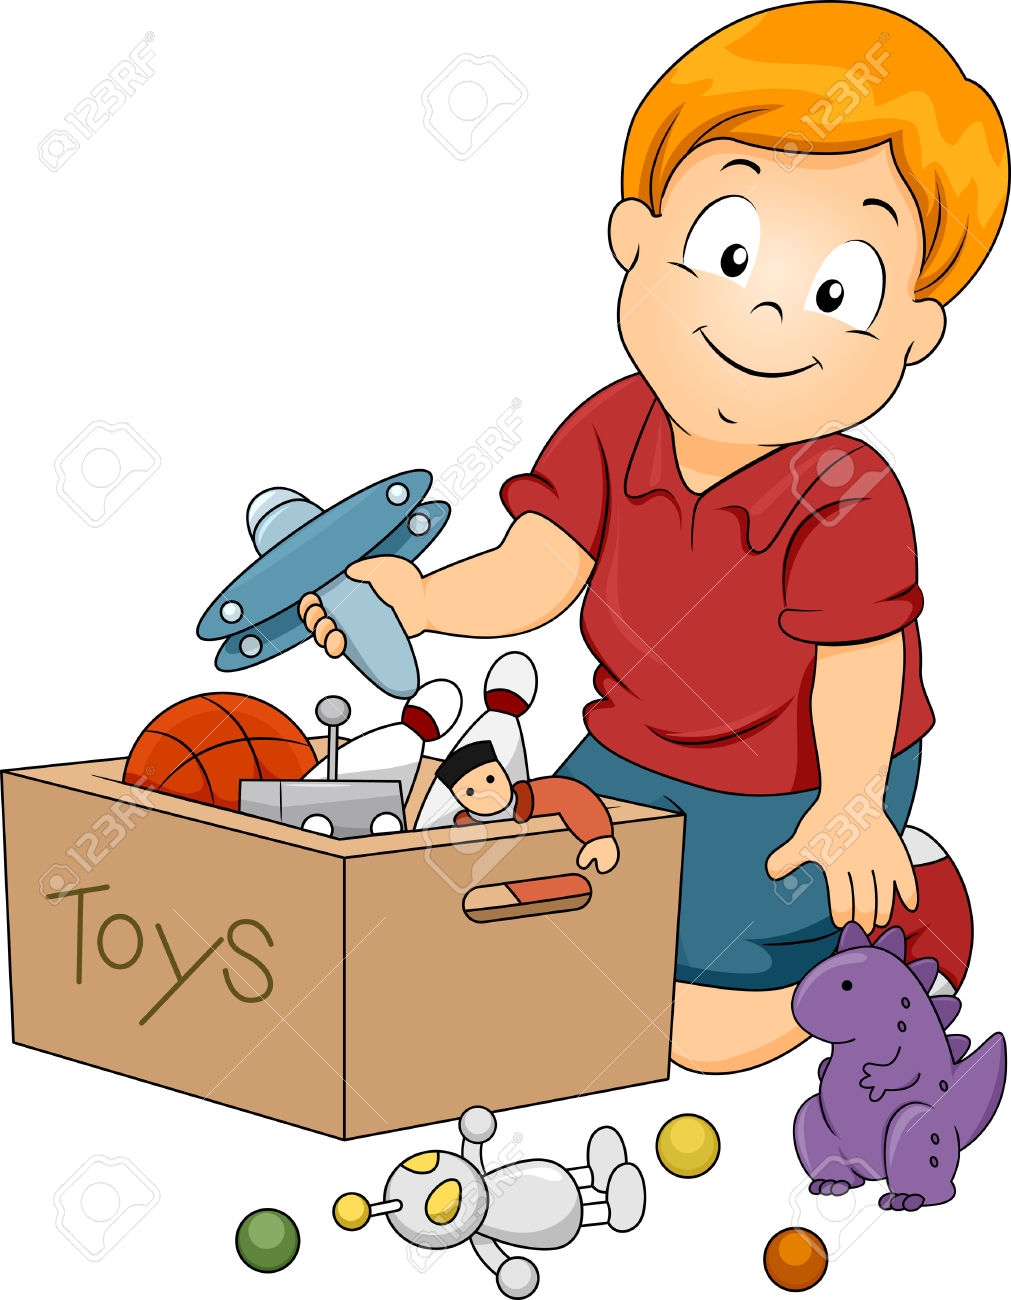 Download Tidy Up Toys Clipart